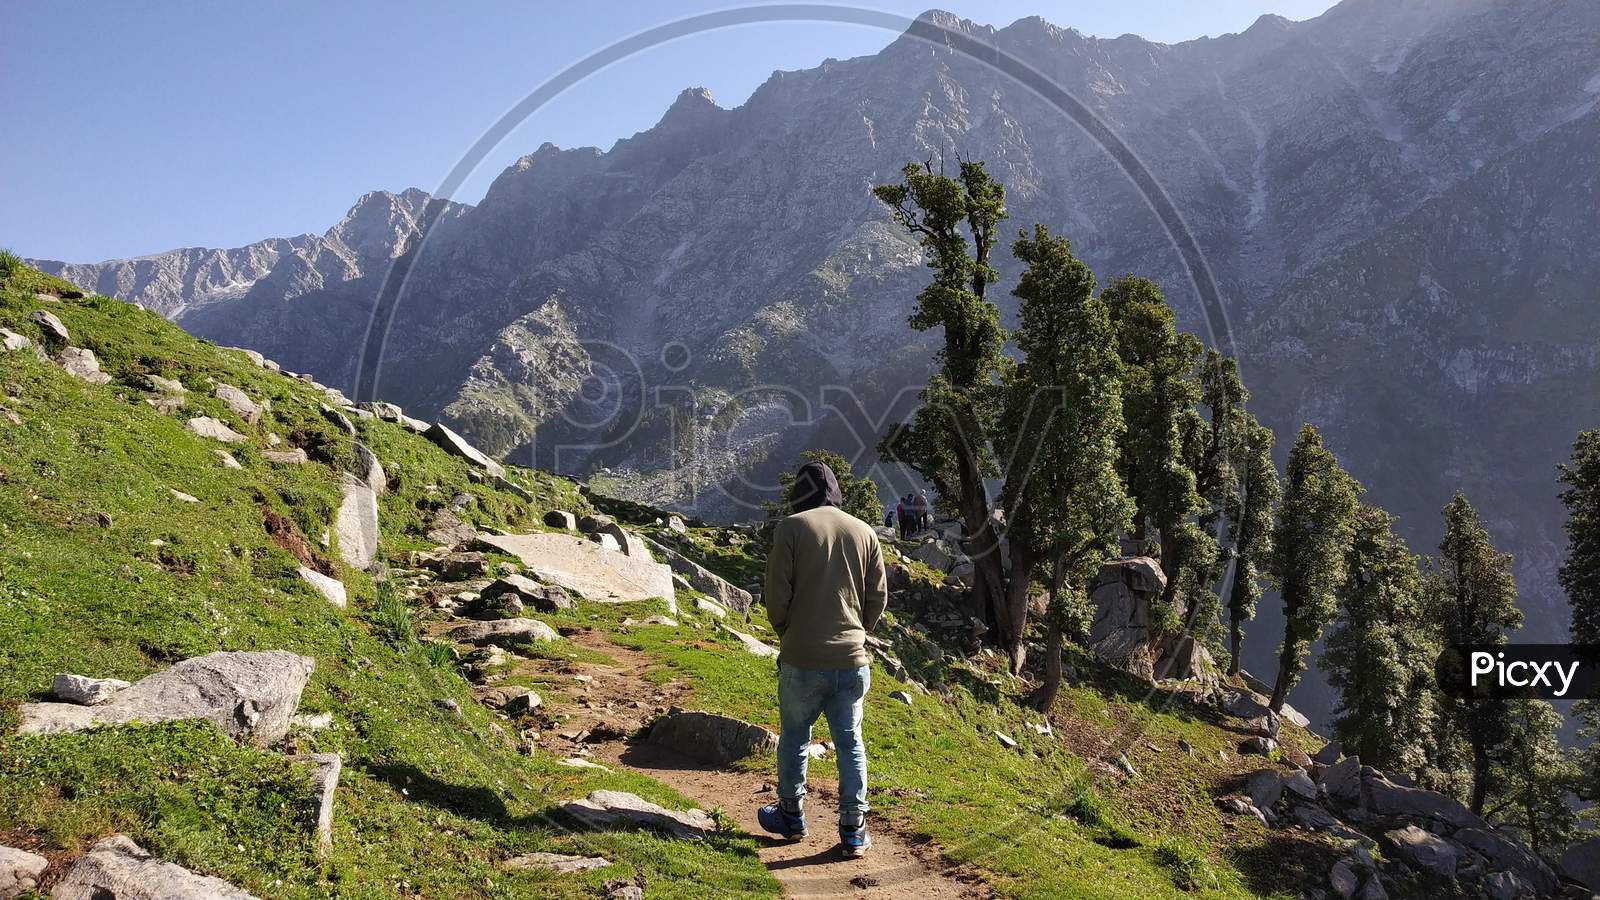 Hiker walking on top of a mountain and enjoying the view in India Mountains Himalayas Dharamshala Triund Himachal Pradesh. Mountaineering sport